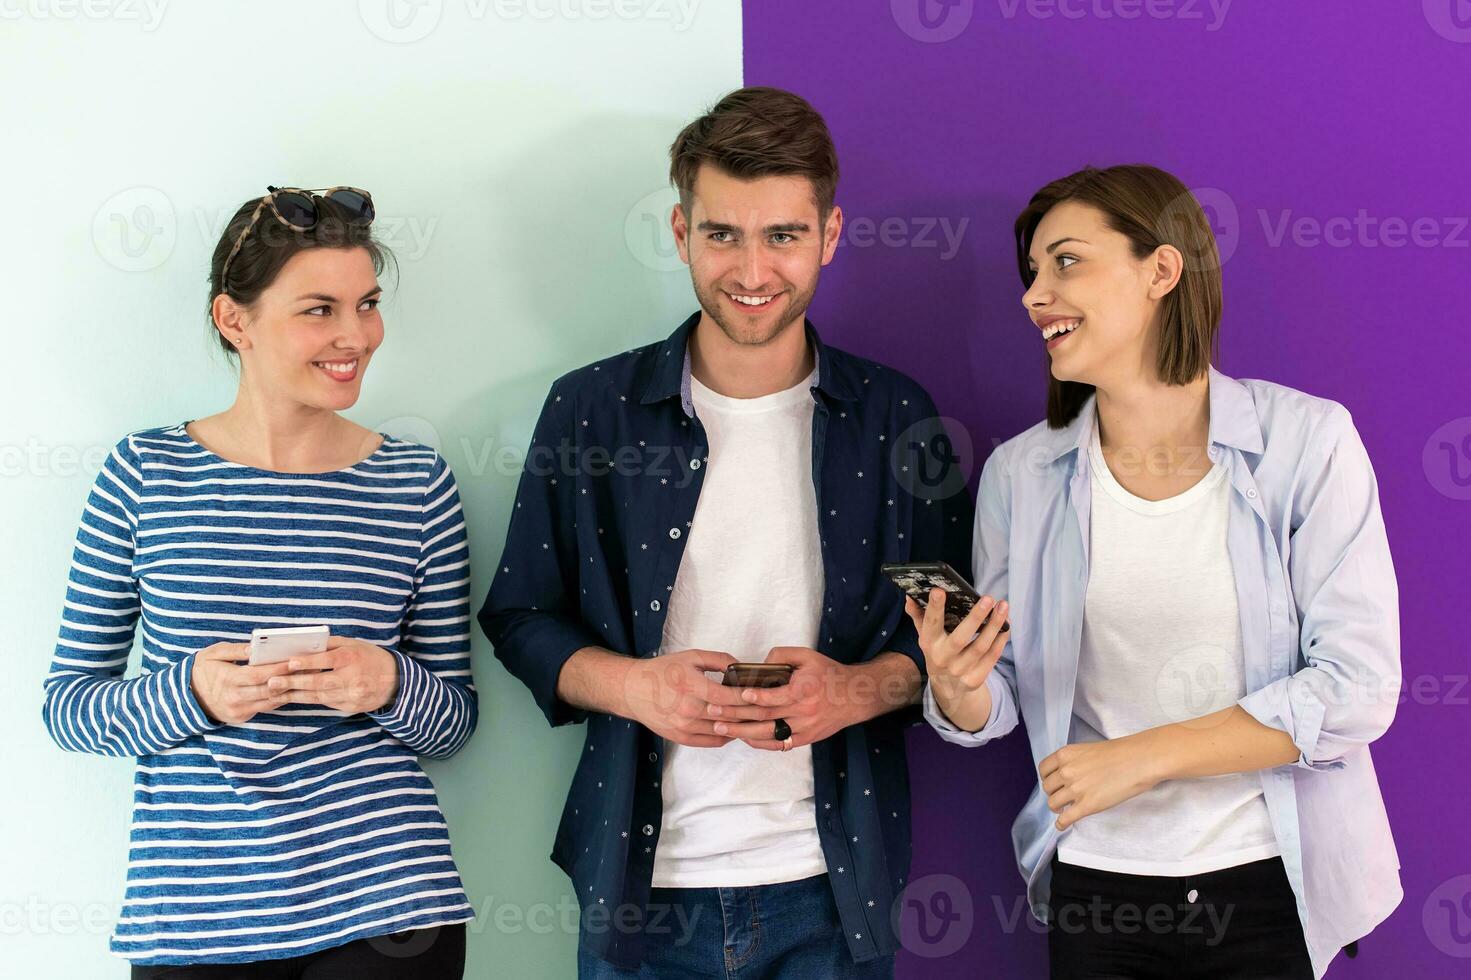 Diverse teenagers using mobile devices while posing for a studio photo in front of a colorful background